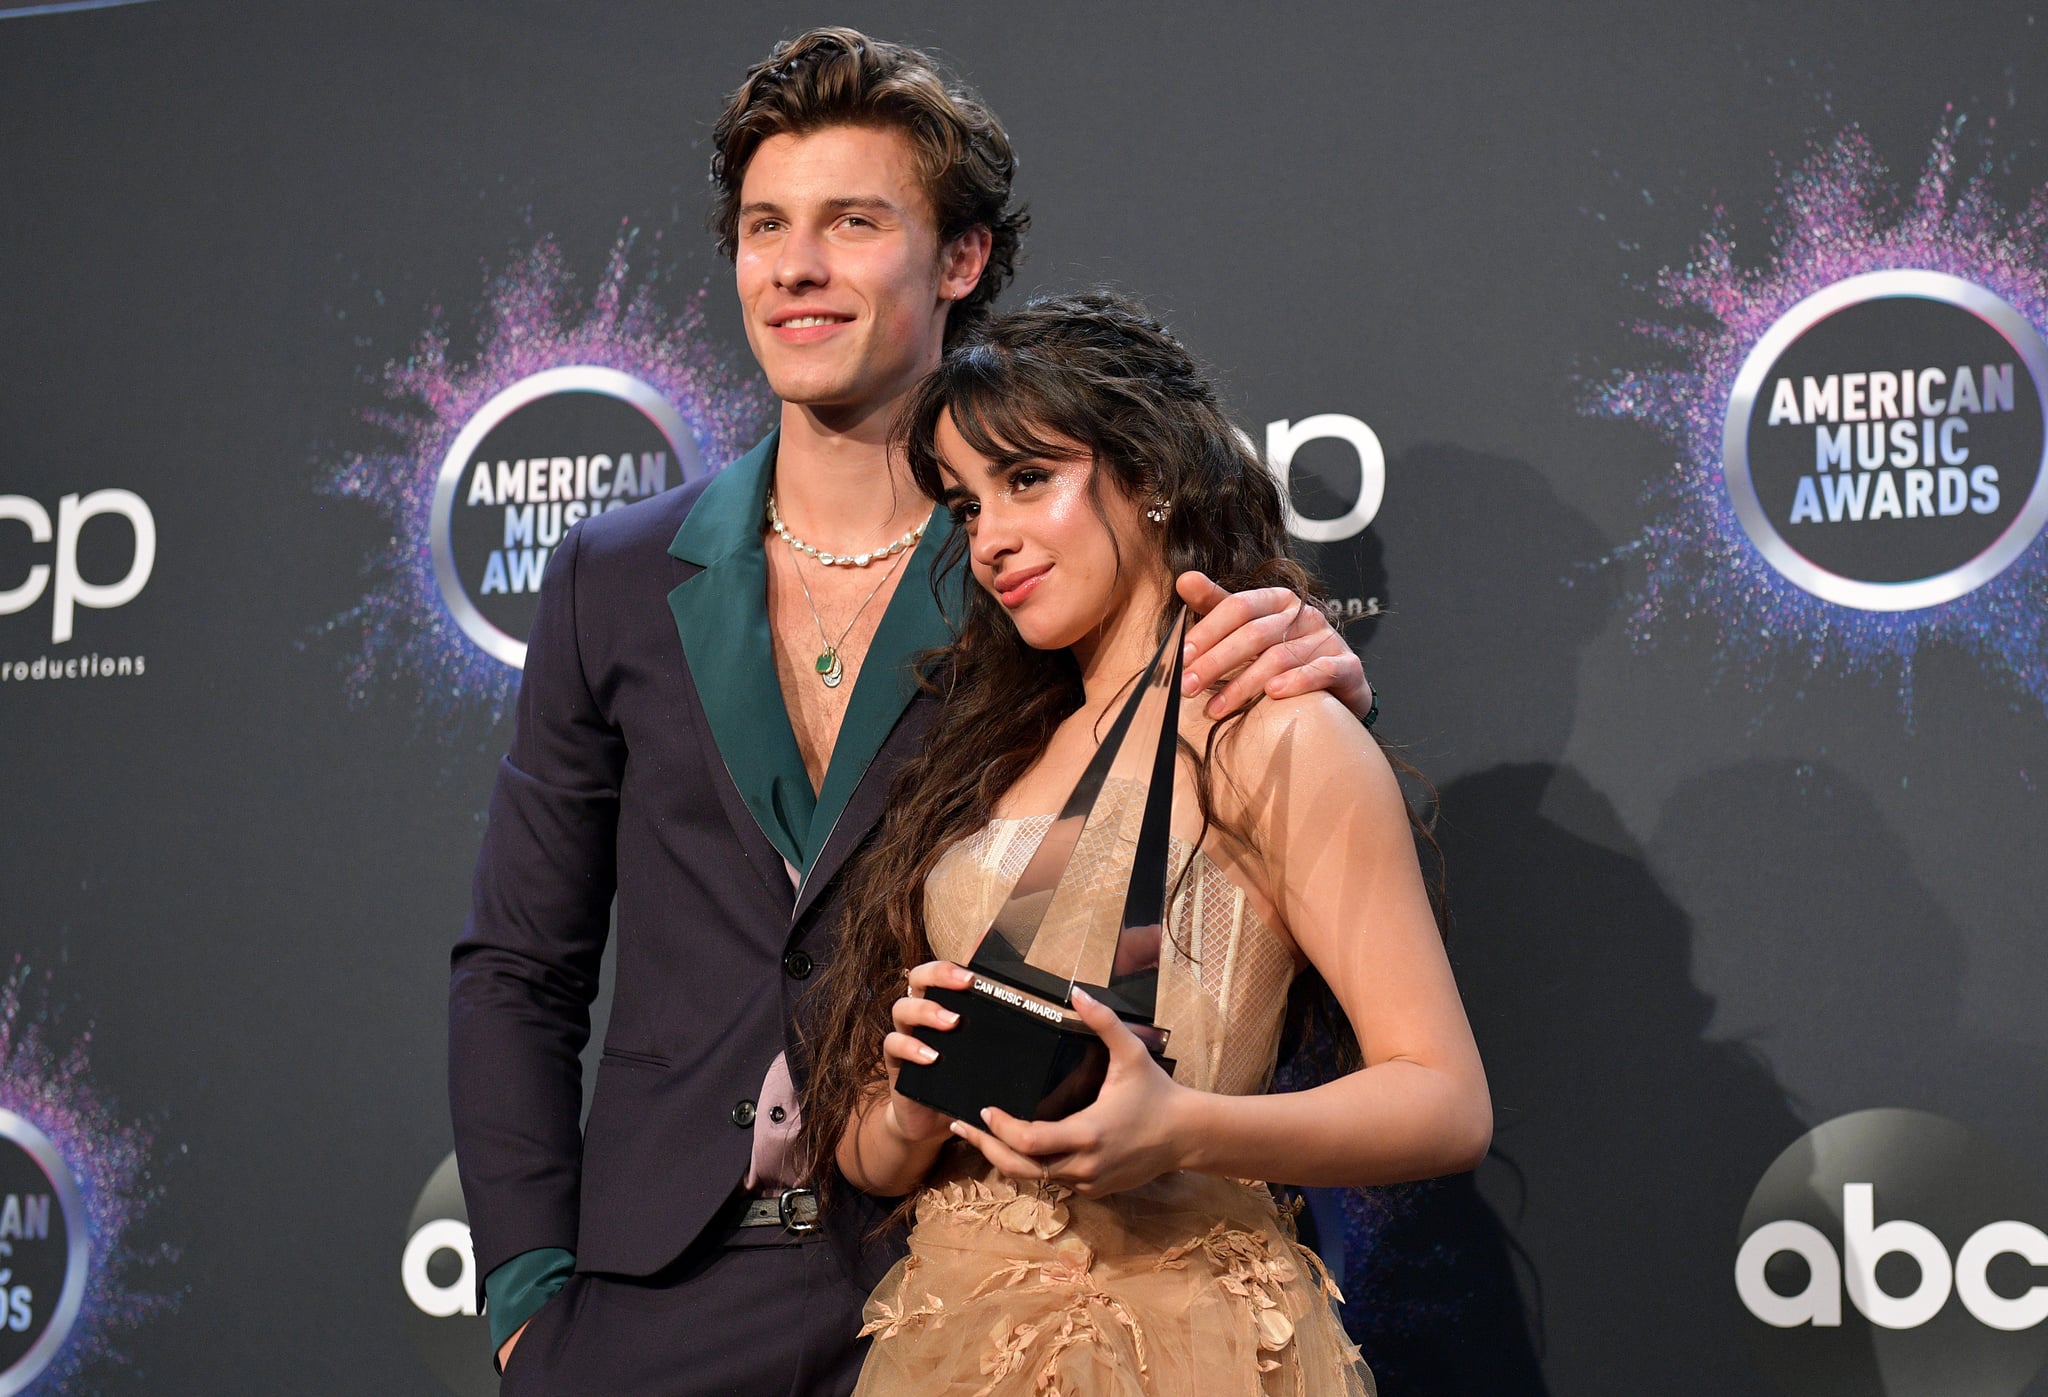 LOS ANGELES, CALIFORNIA - NOVEMBER 24: (L-R) Shawn Mendes and Camila Cabello, winners of the Collaboration of the Year award for 'Señorita,' pose in the press room during the 2019 American Music Awards at Microsoft Theatre on November 24, 2019 in Los Angeles, California. (Photo by Matt Winkelmeyer/Getty Images for dcp)